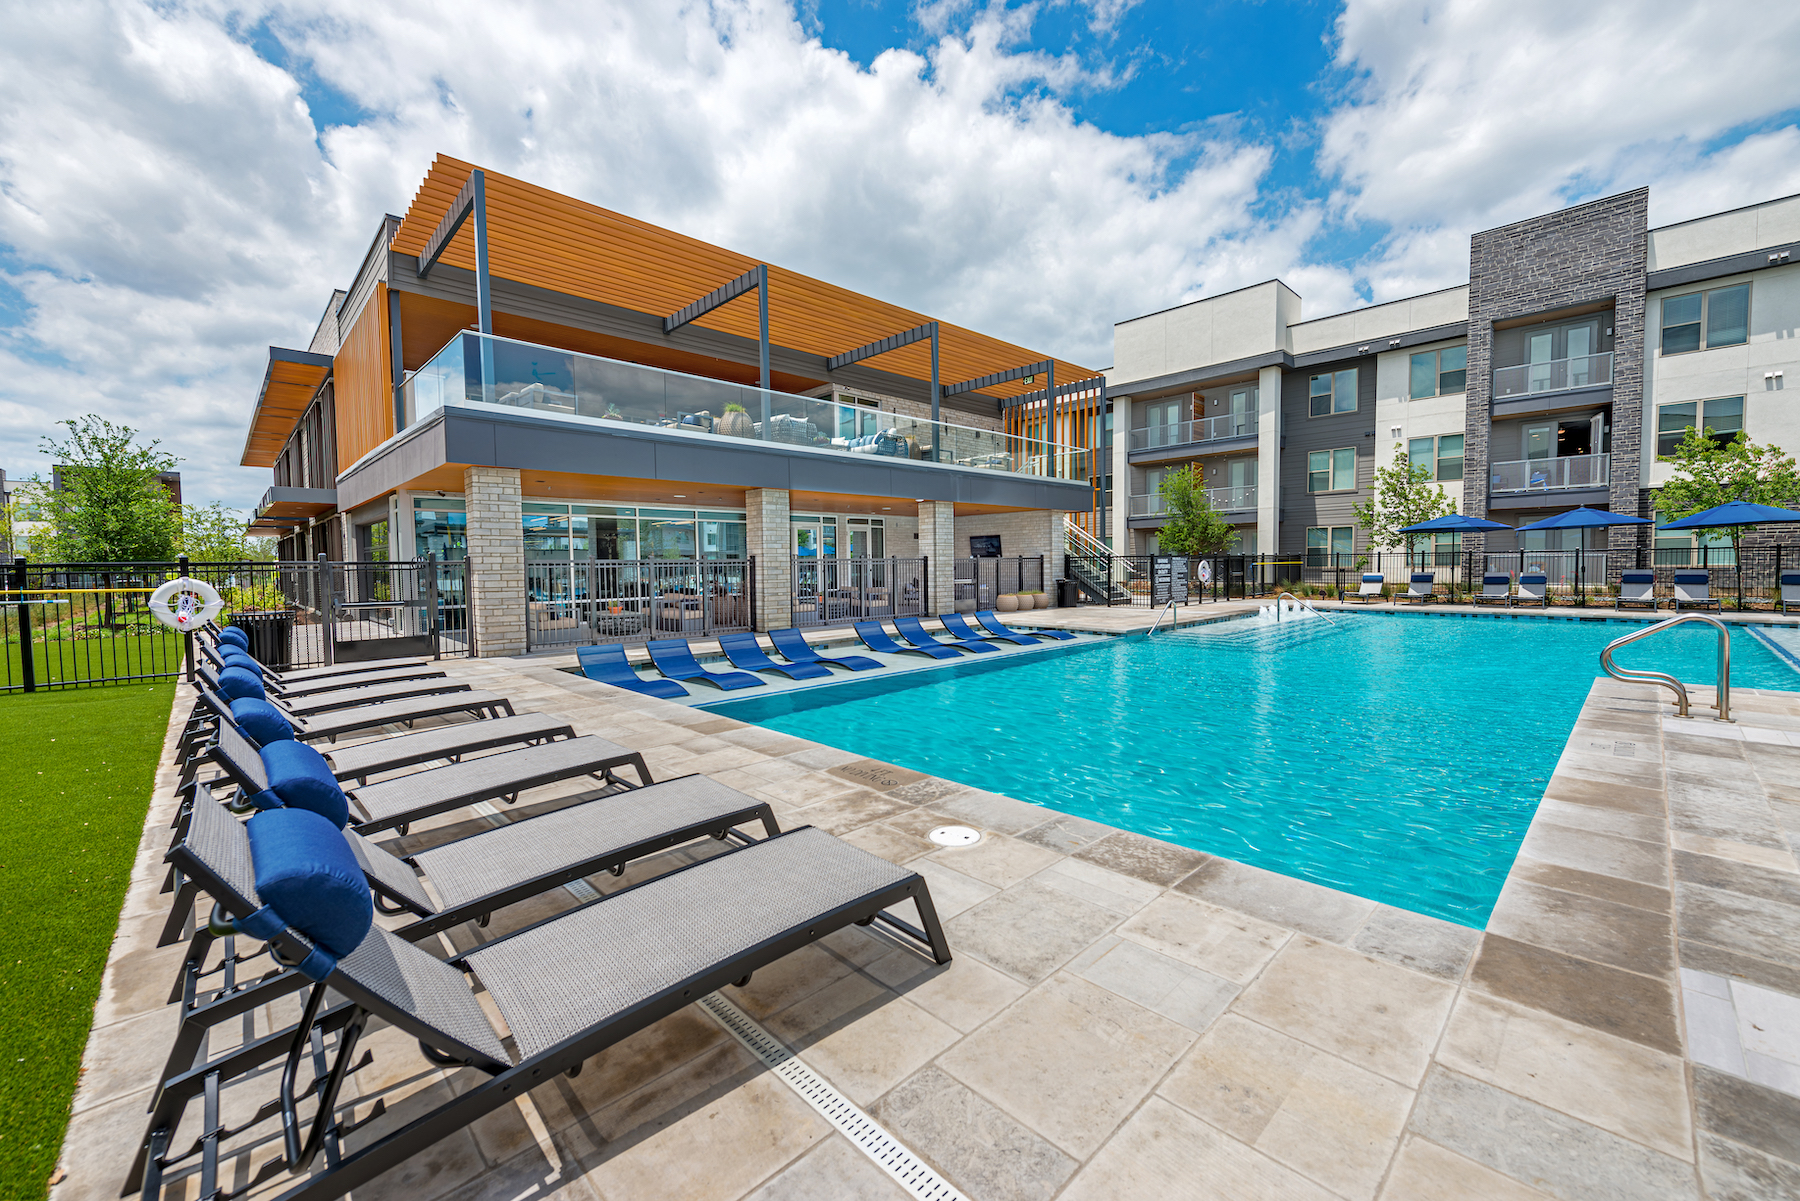 11 notable multifamily projects to debut in 2021; Pictured: Presidium Revelstoke, North Fort Worth, Texas. Photo: Jeff Brady, 360X360 Tours